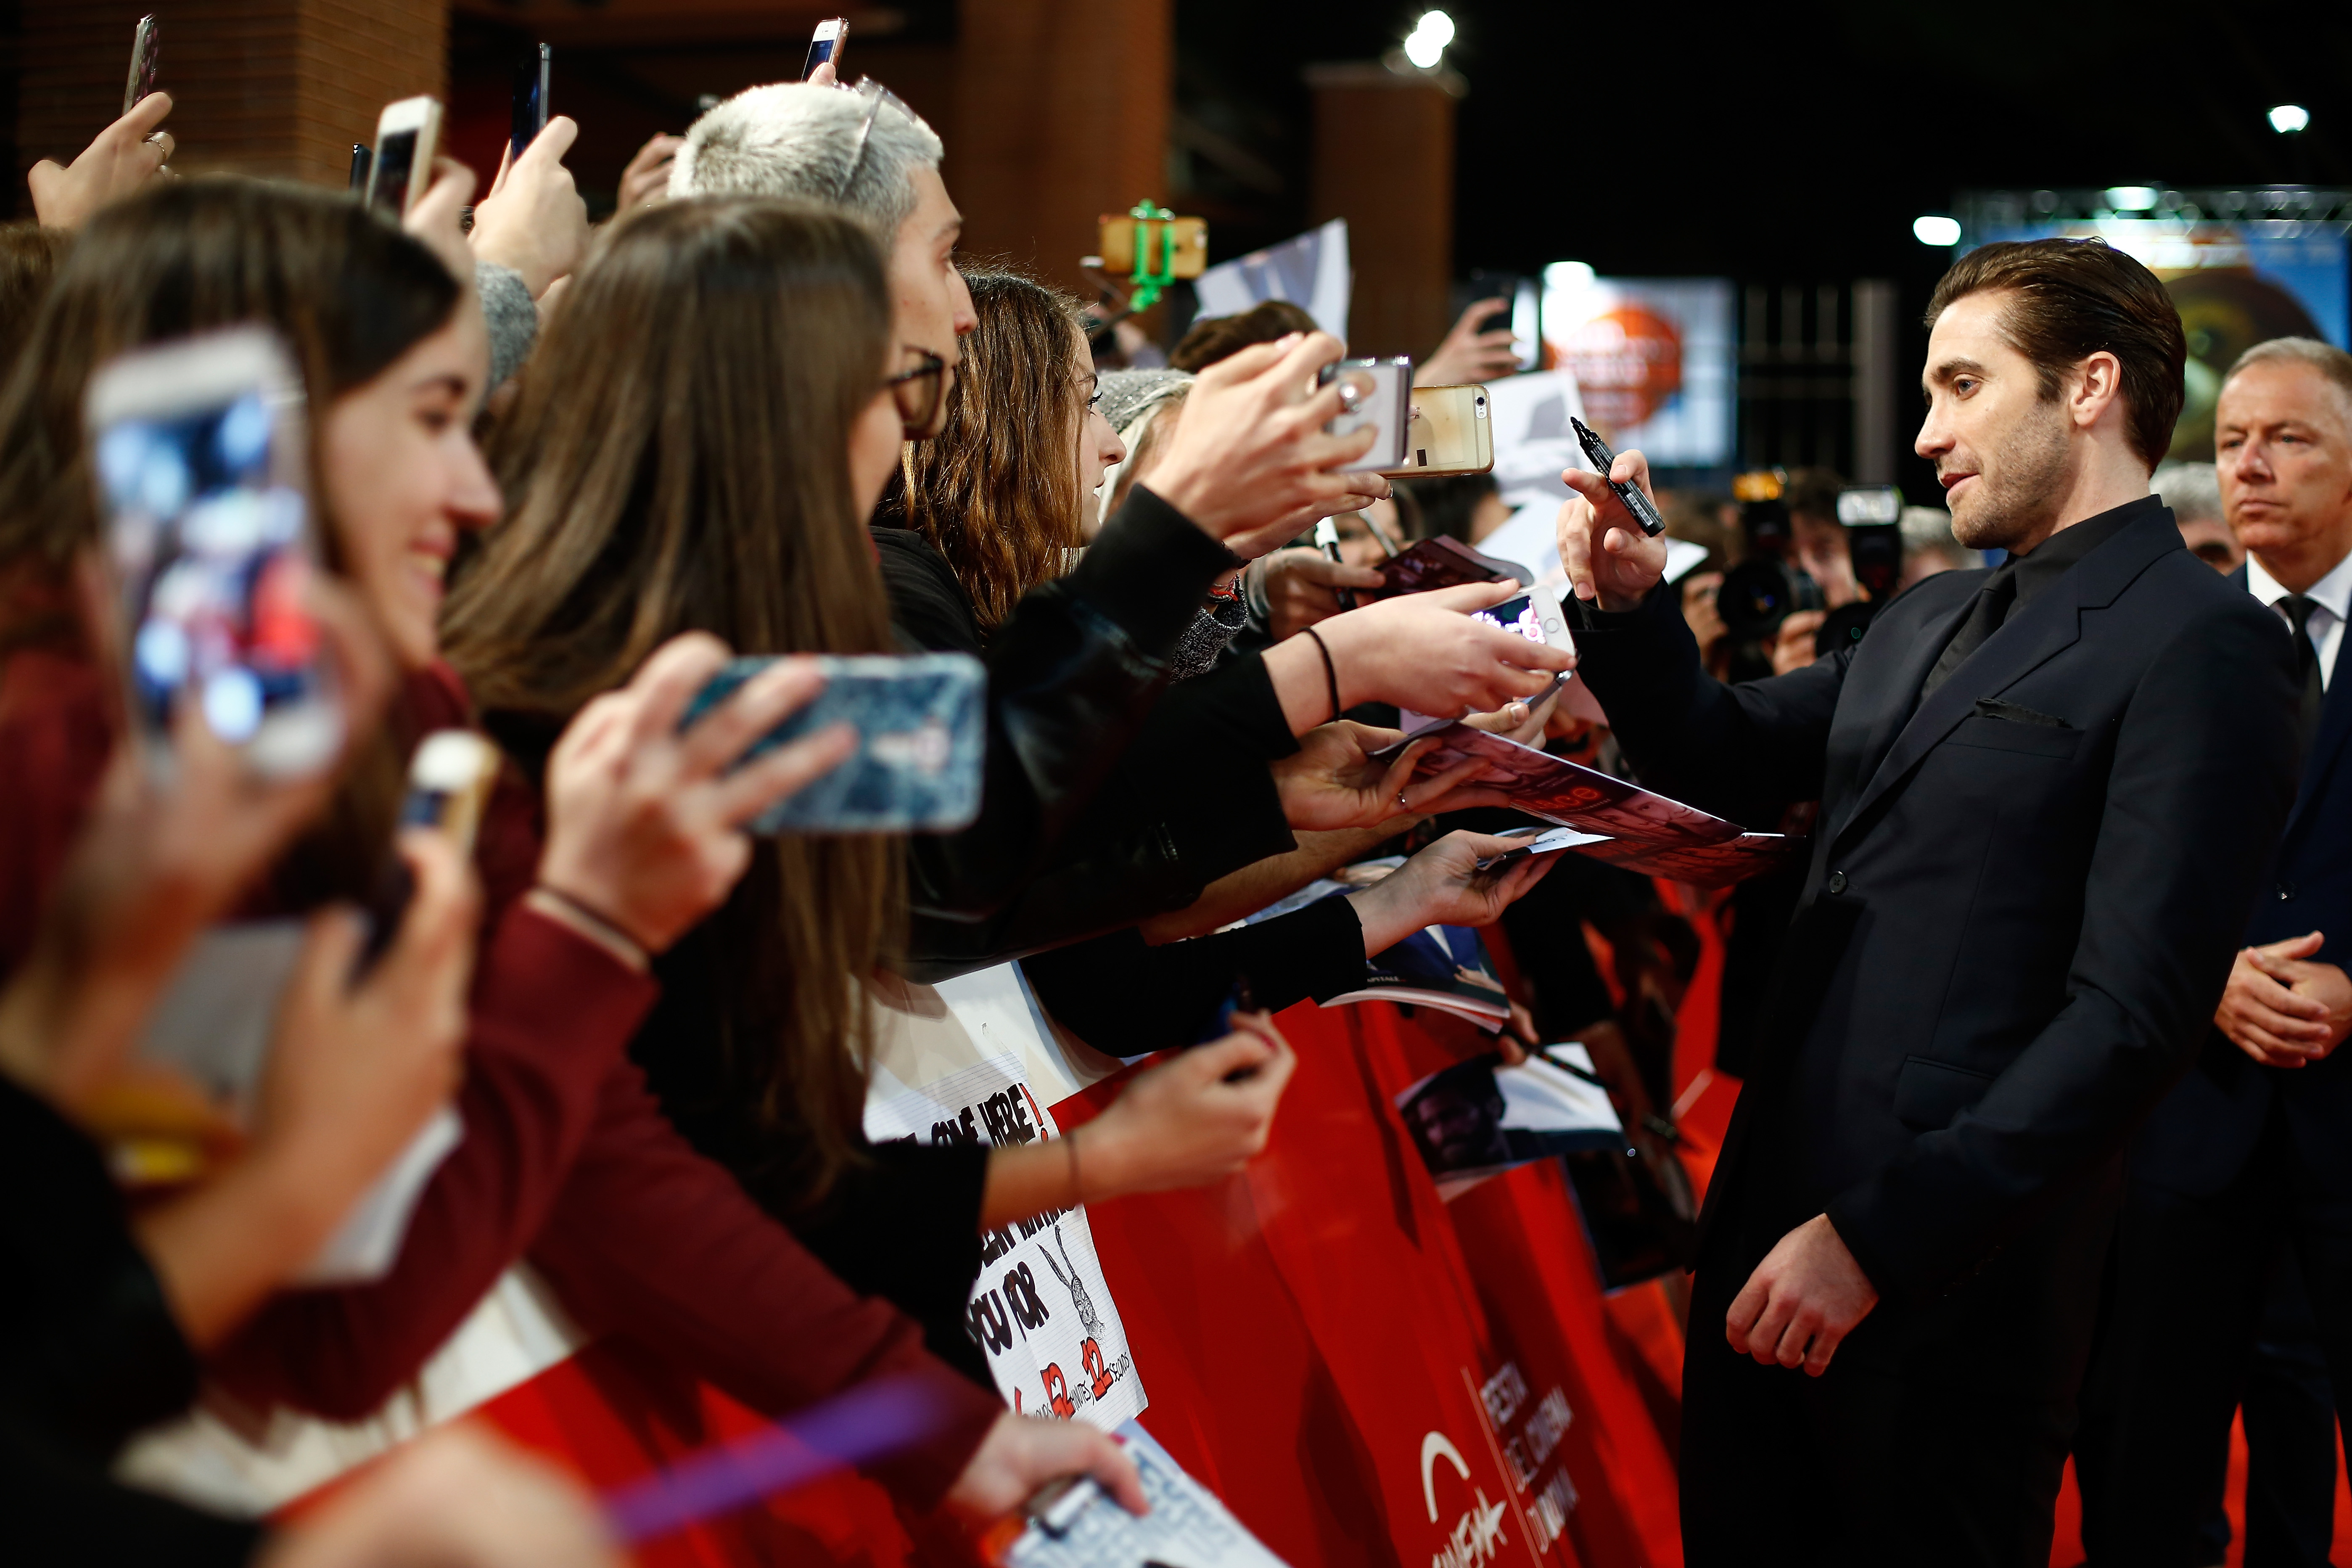 walks a red carpet for 'Stronger' during the 12th Rome Film Fest at Auditorium Parco Della Musica on October 28, 2017 in Rome, Italy.